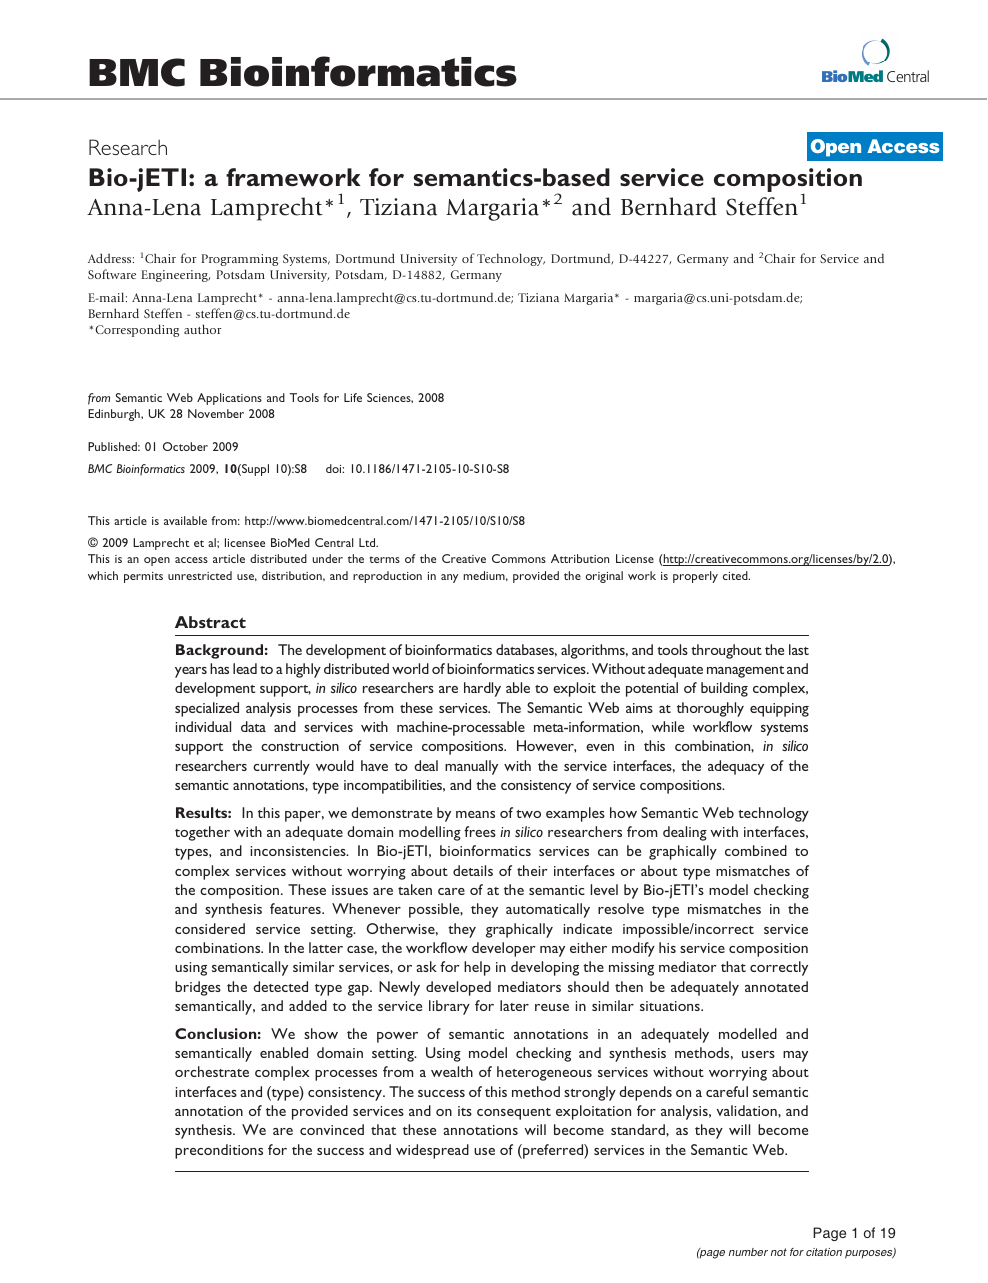 Op en neer gaan ondernemen beklimmen Bio-jETI: a framework for semantics-based service composition – topic of  research paper in Computer and information sciences. Download scholarly  article PDF and read for free on CyberLeninka open science hub.